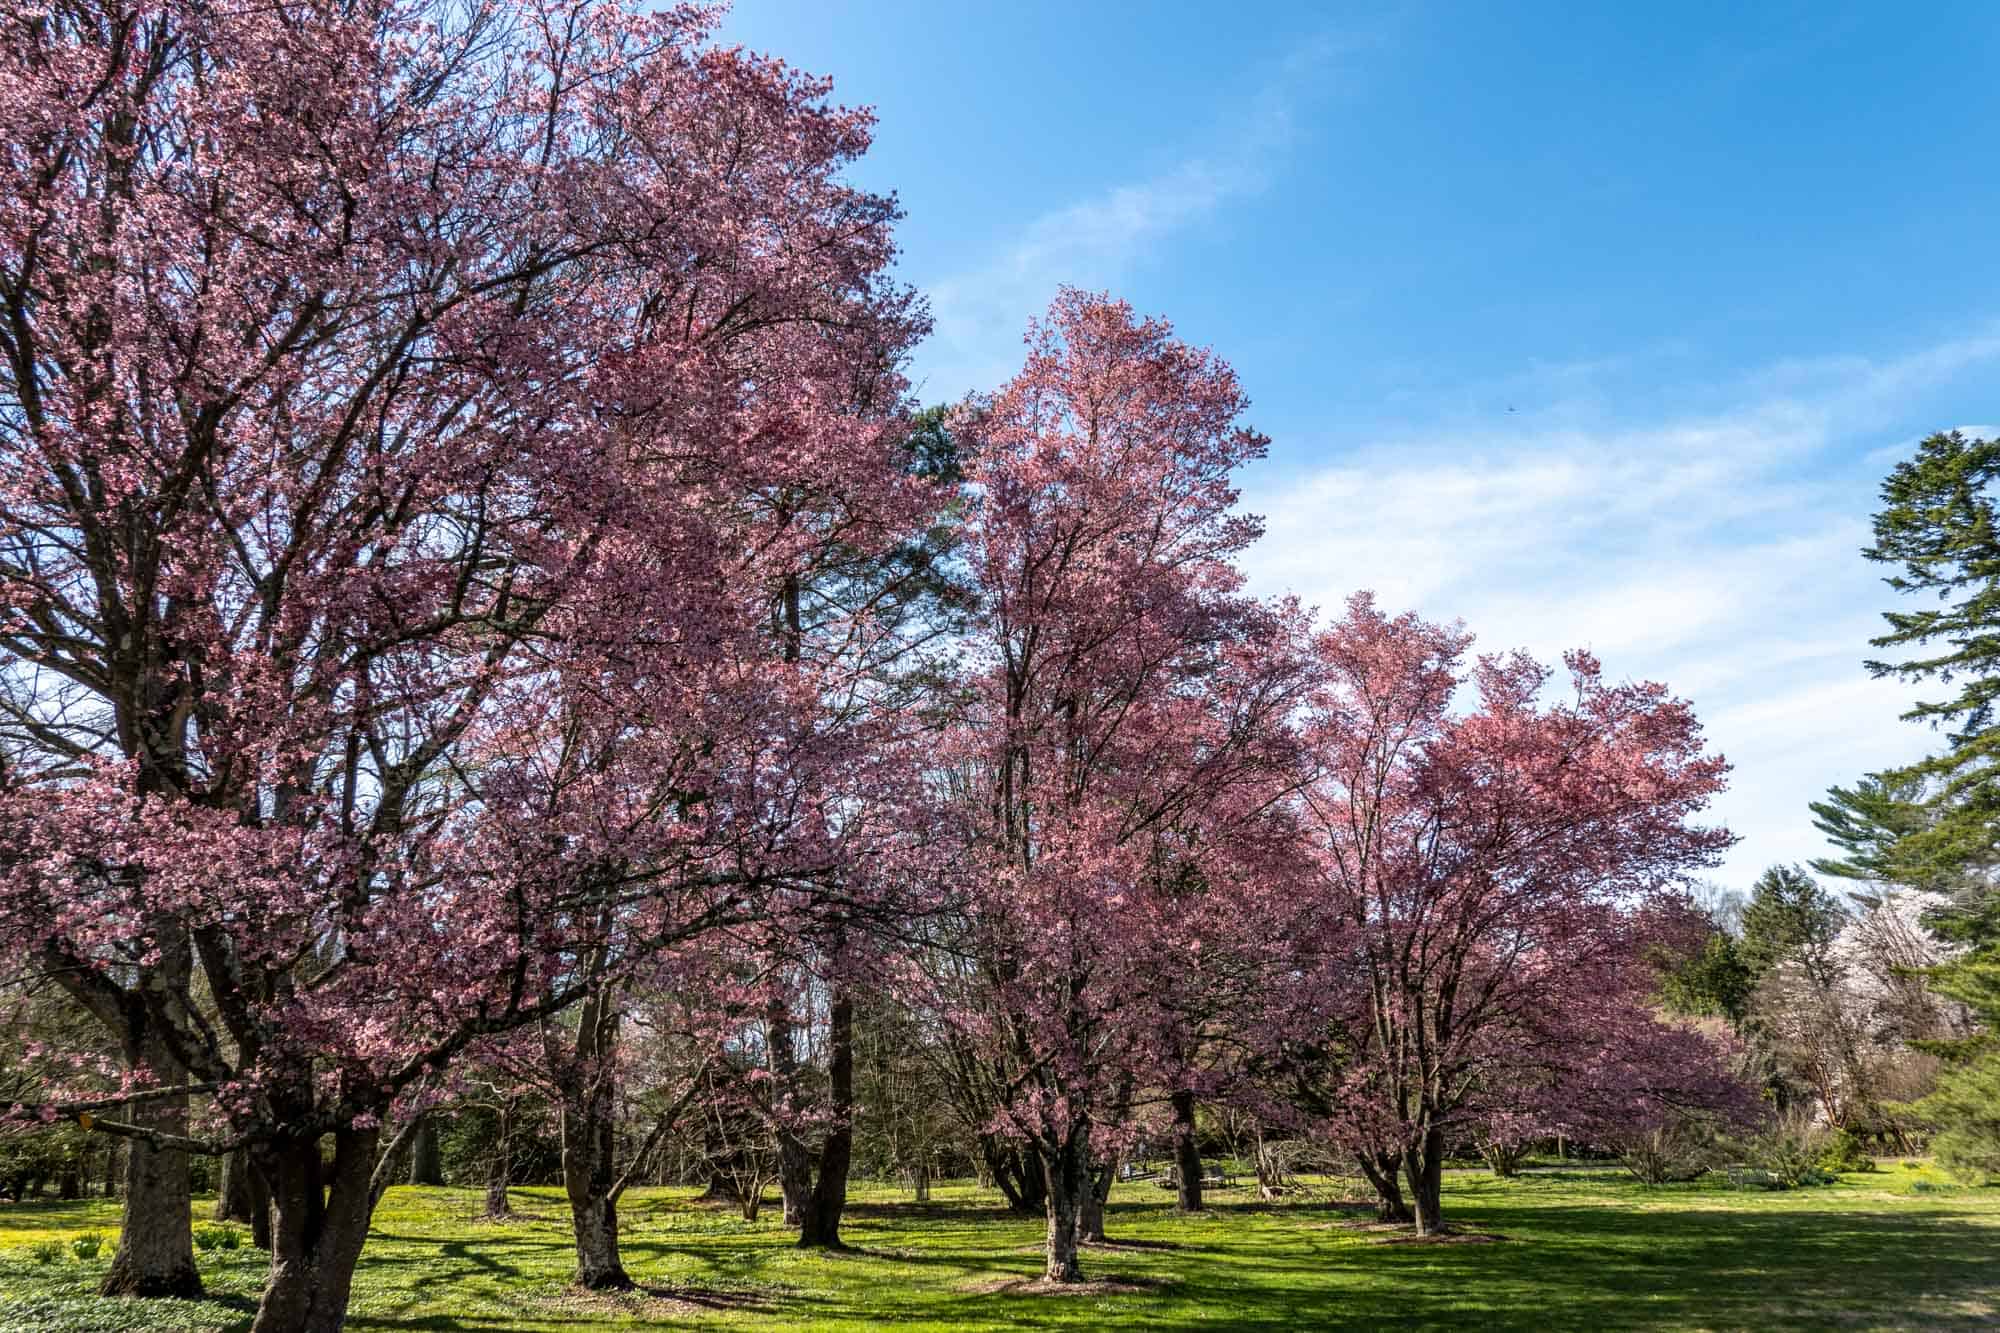 Line of cherry trees with pink blossoms